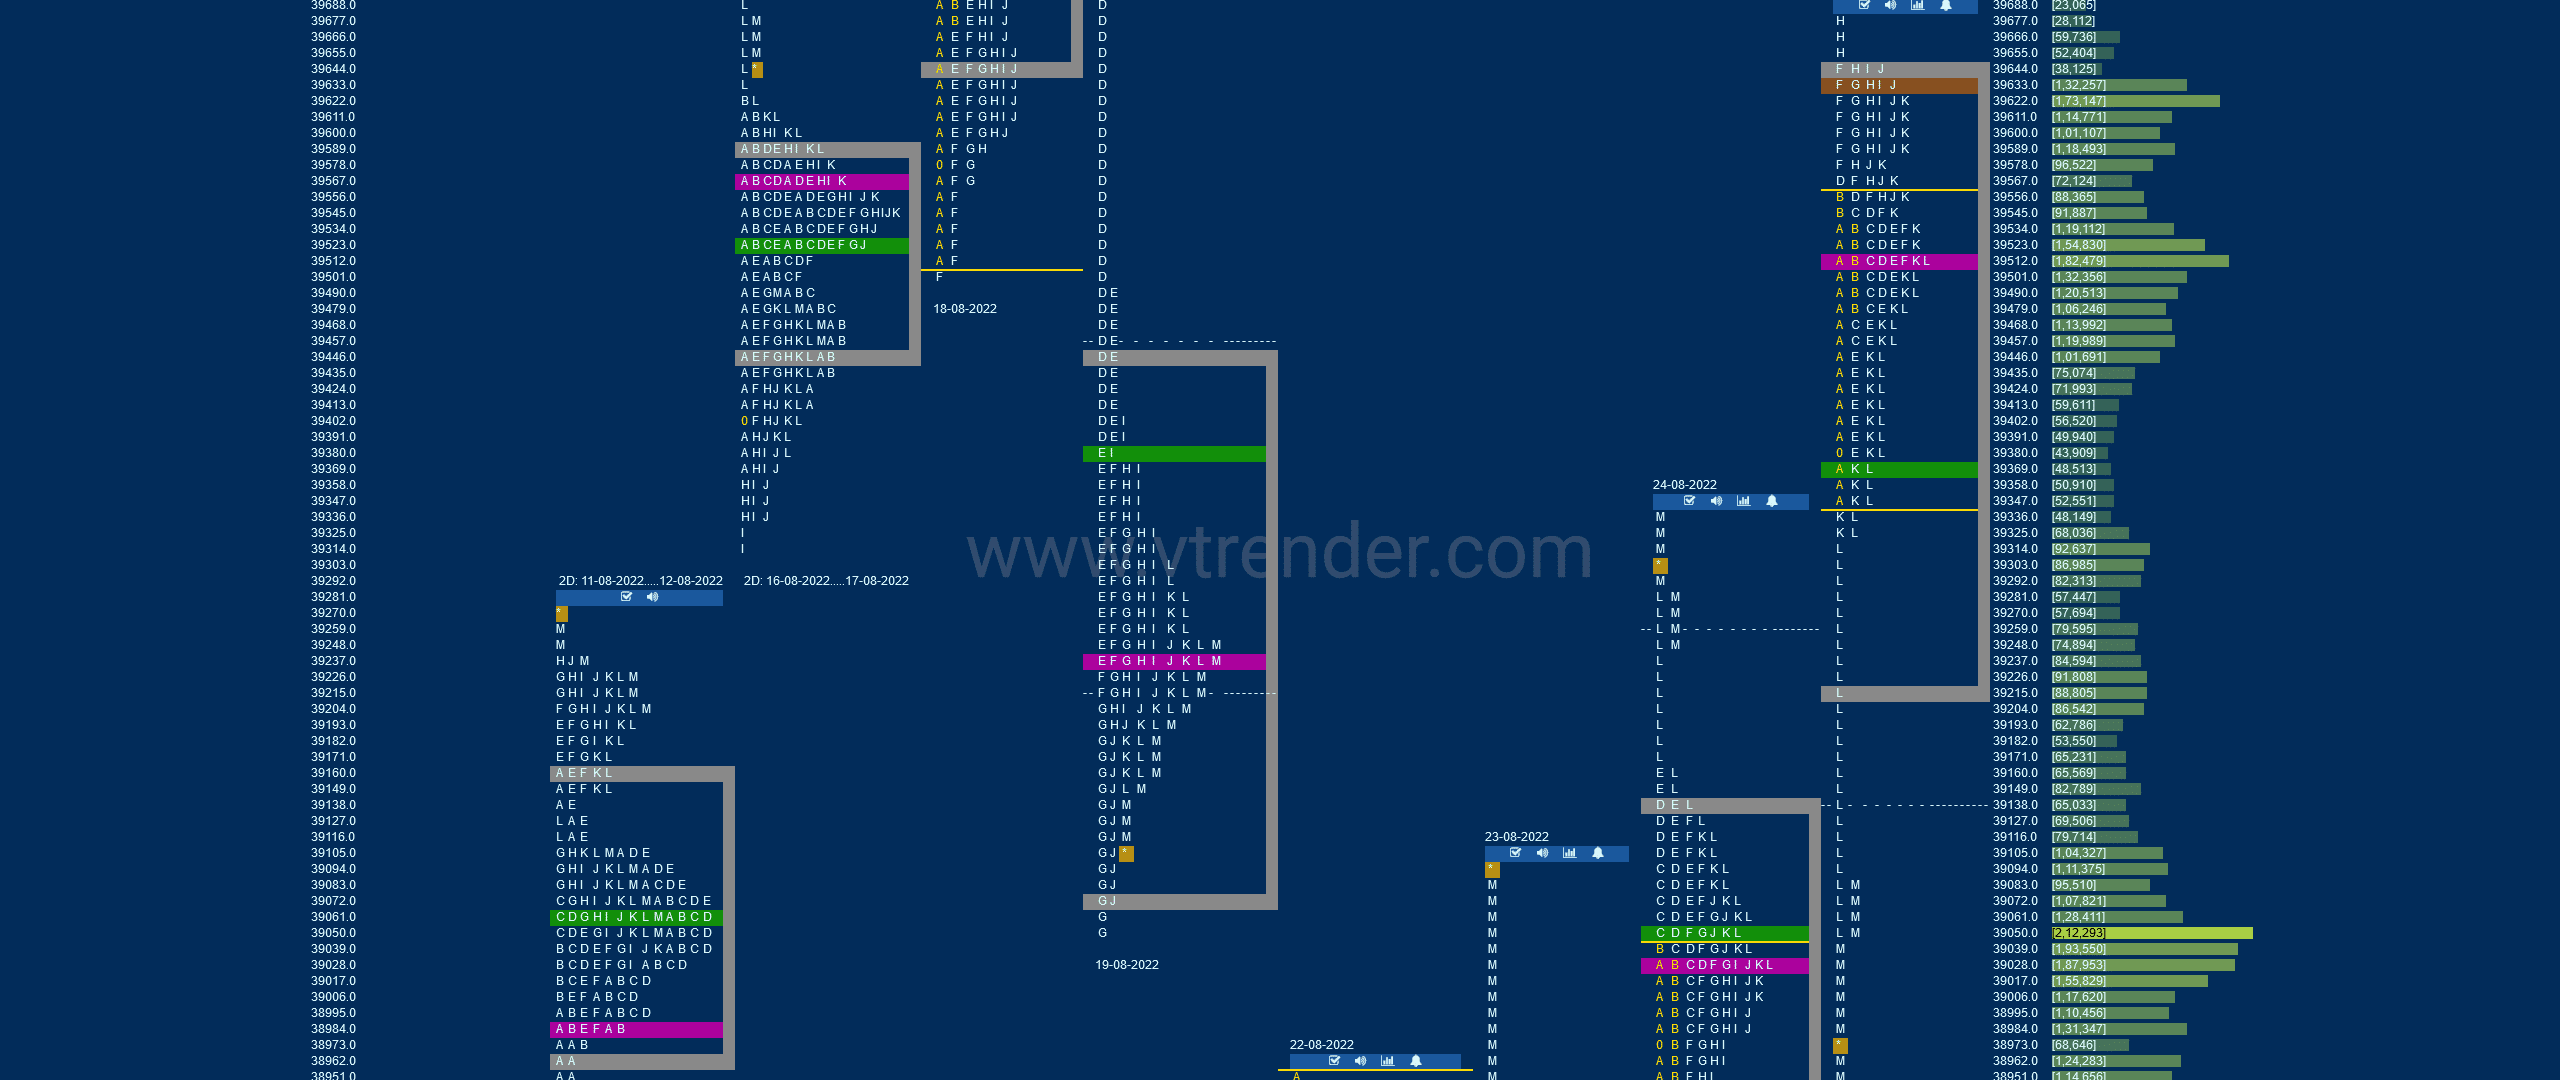 Bnf 17 Market Profile Analysis Dated 25Th Aug 2022 Banknifty Futures, Charts, Day Trading, Intraday Trading, Intraday Trading Strategies, Market Profile, Market Profile Trading Strategies, Nifty Futures, Order Flow Analysis, Support And Resistance, Technical Analysis, Trading Strategies, Volume Profile Trading